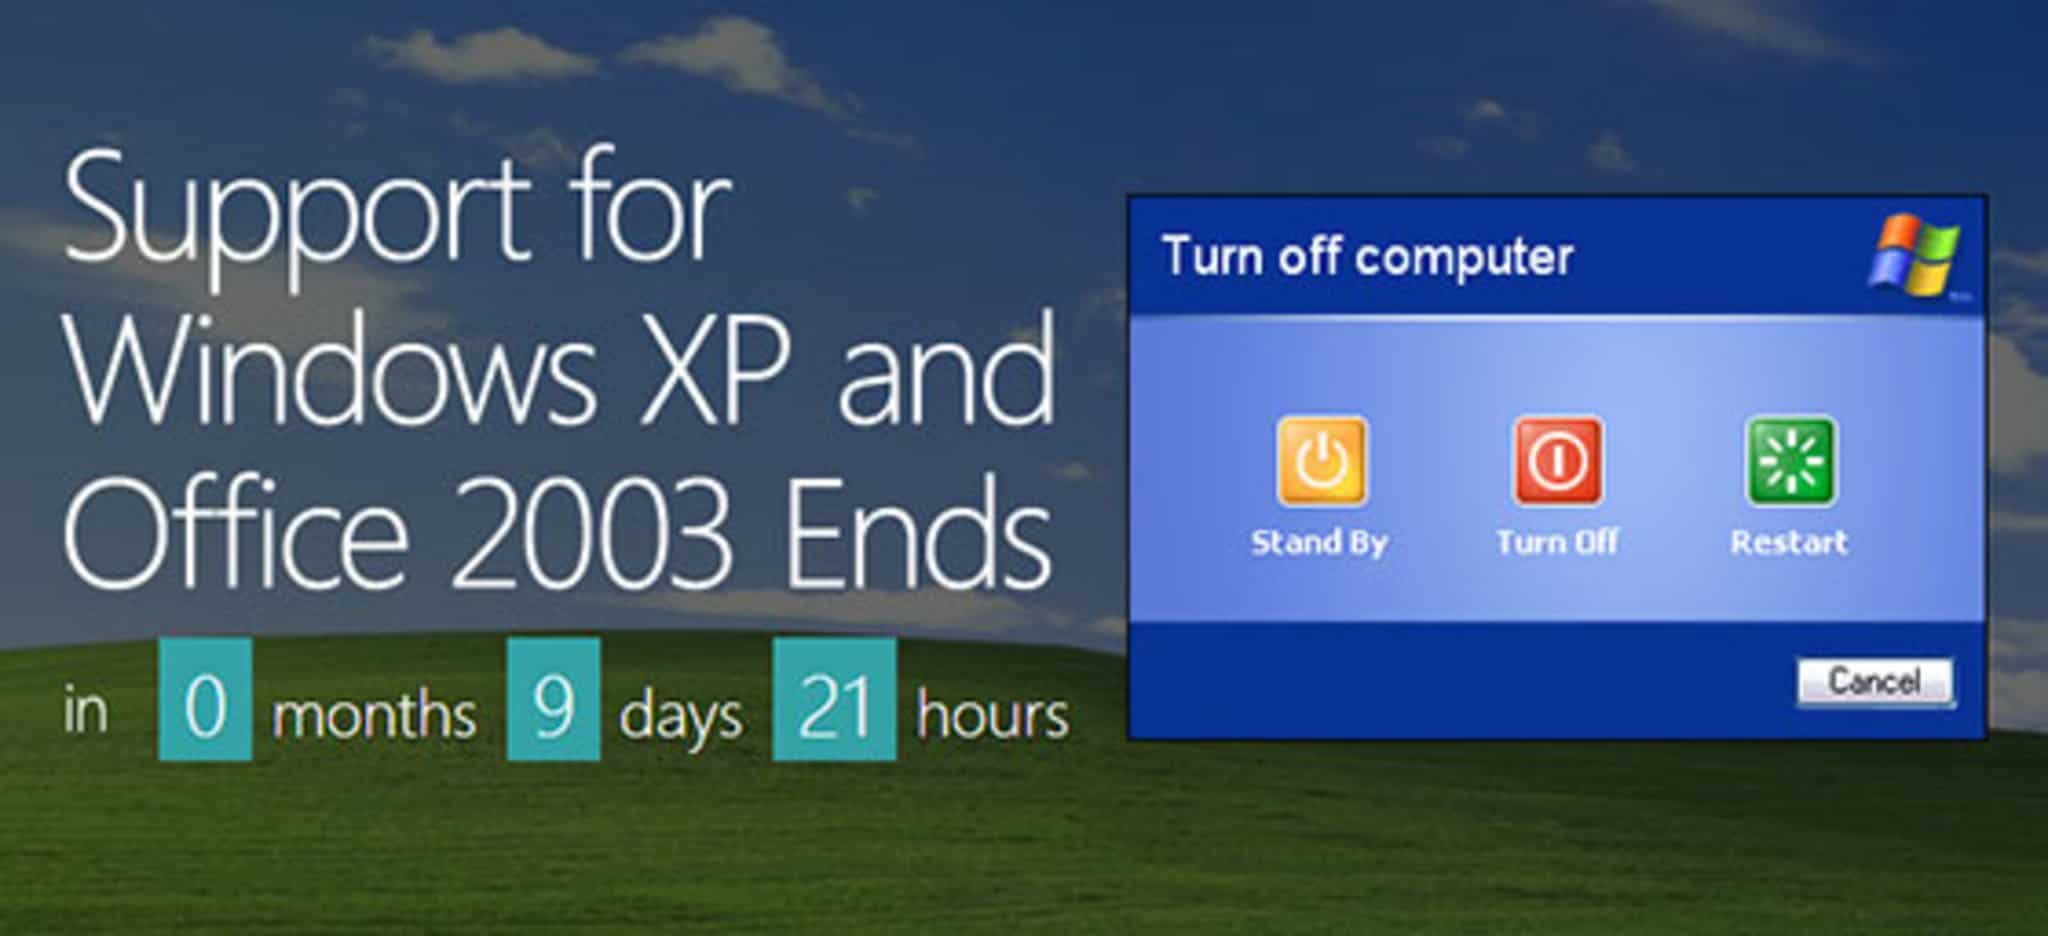 Support for Windows XP ends